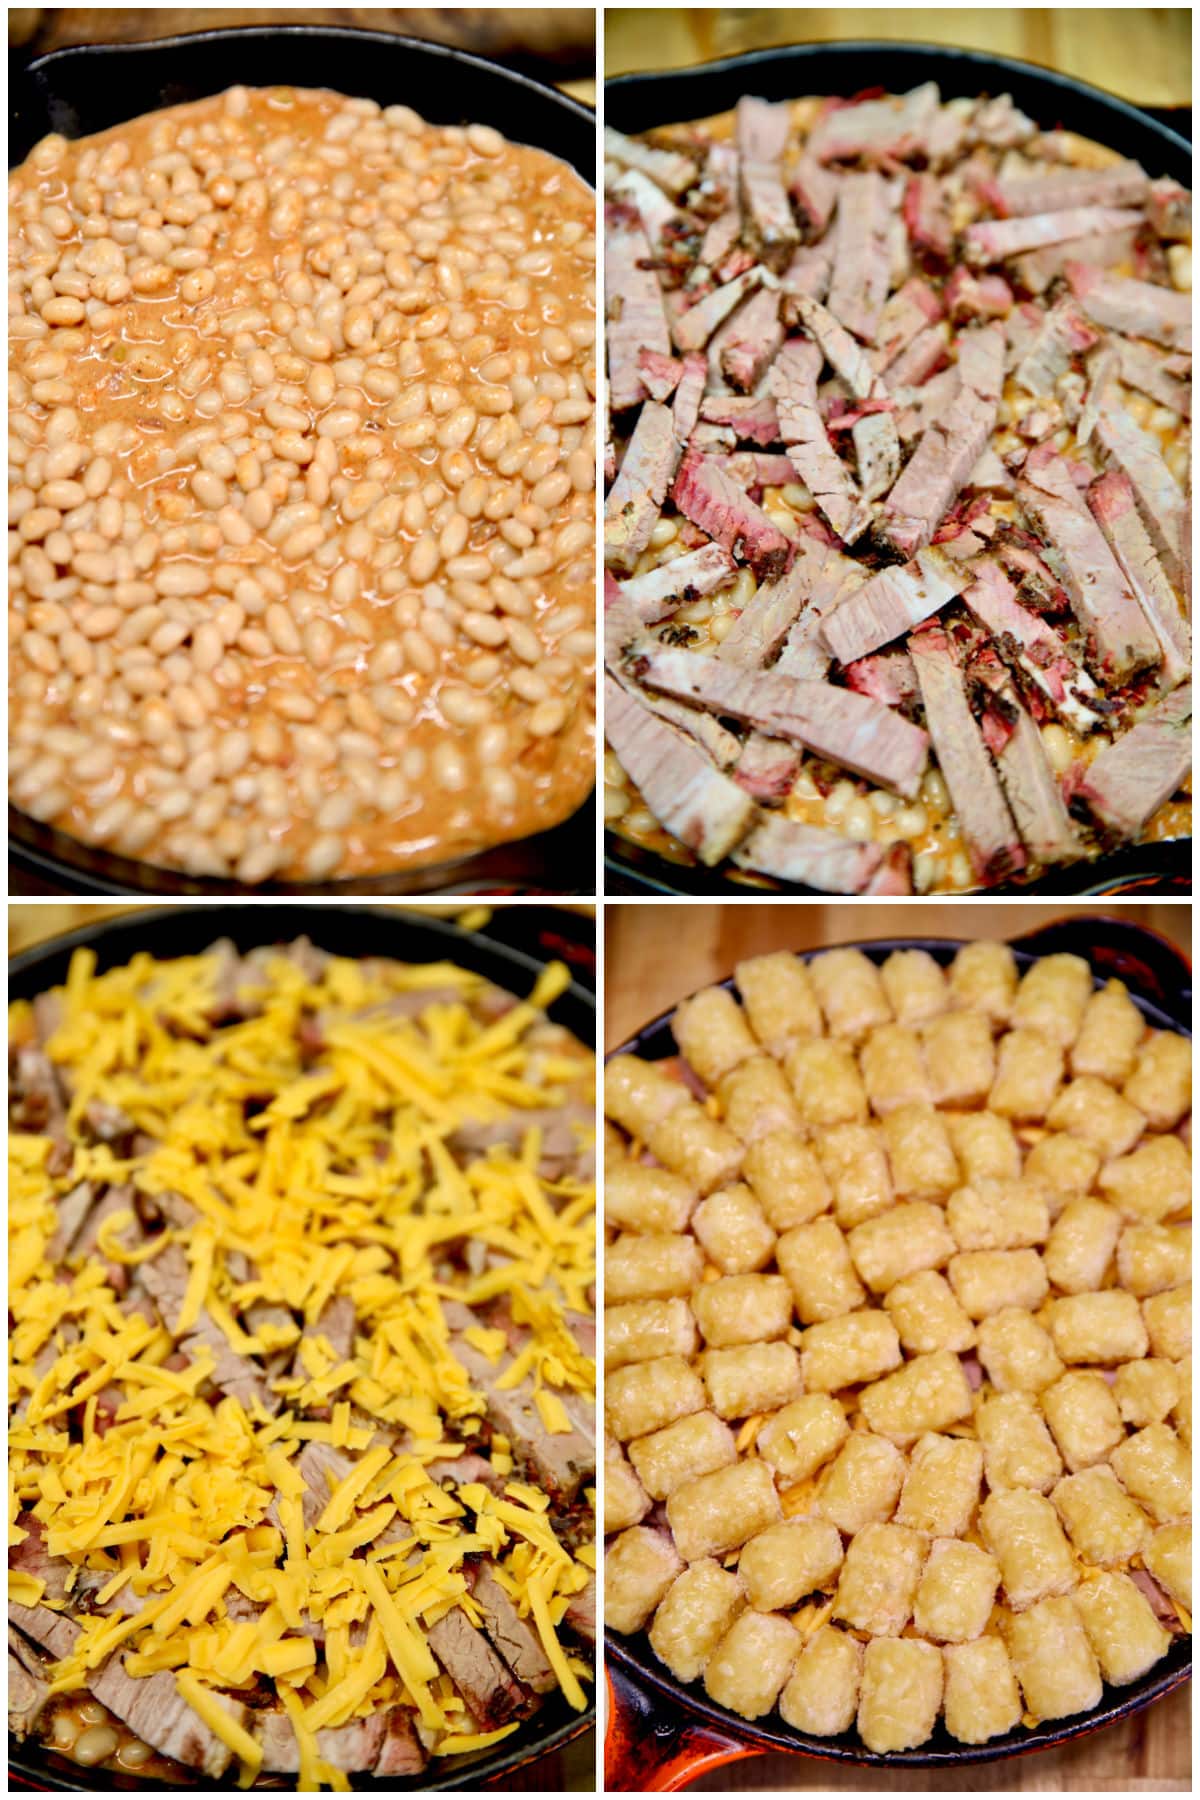 Collage making cowboy casserole with beans, brisket, cheese and tater tots.